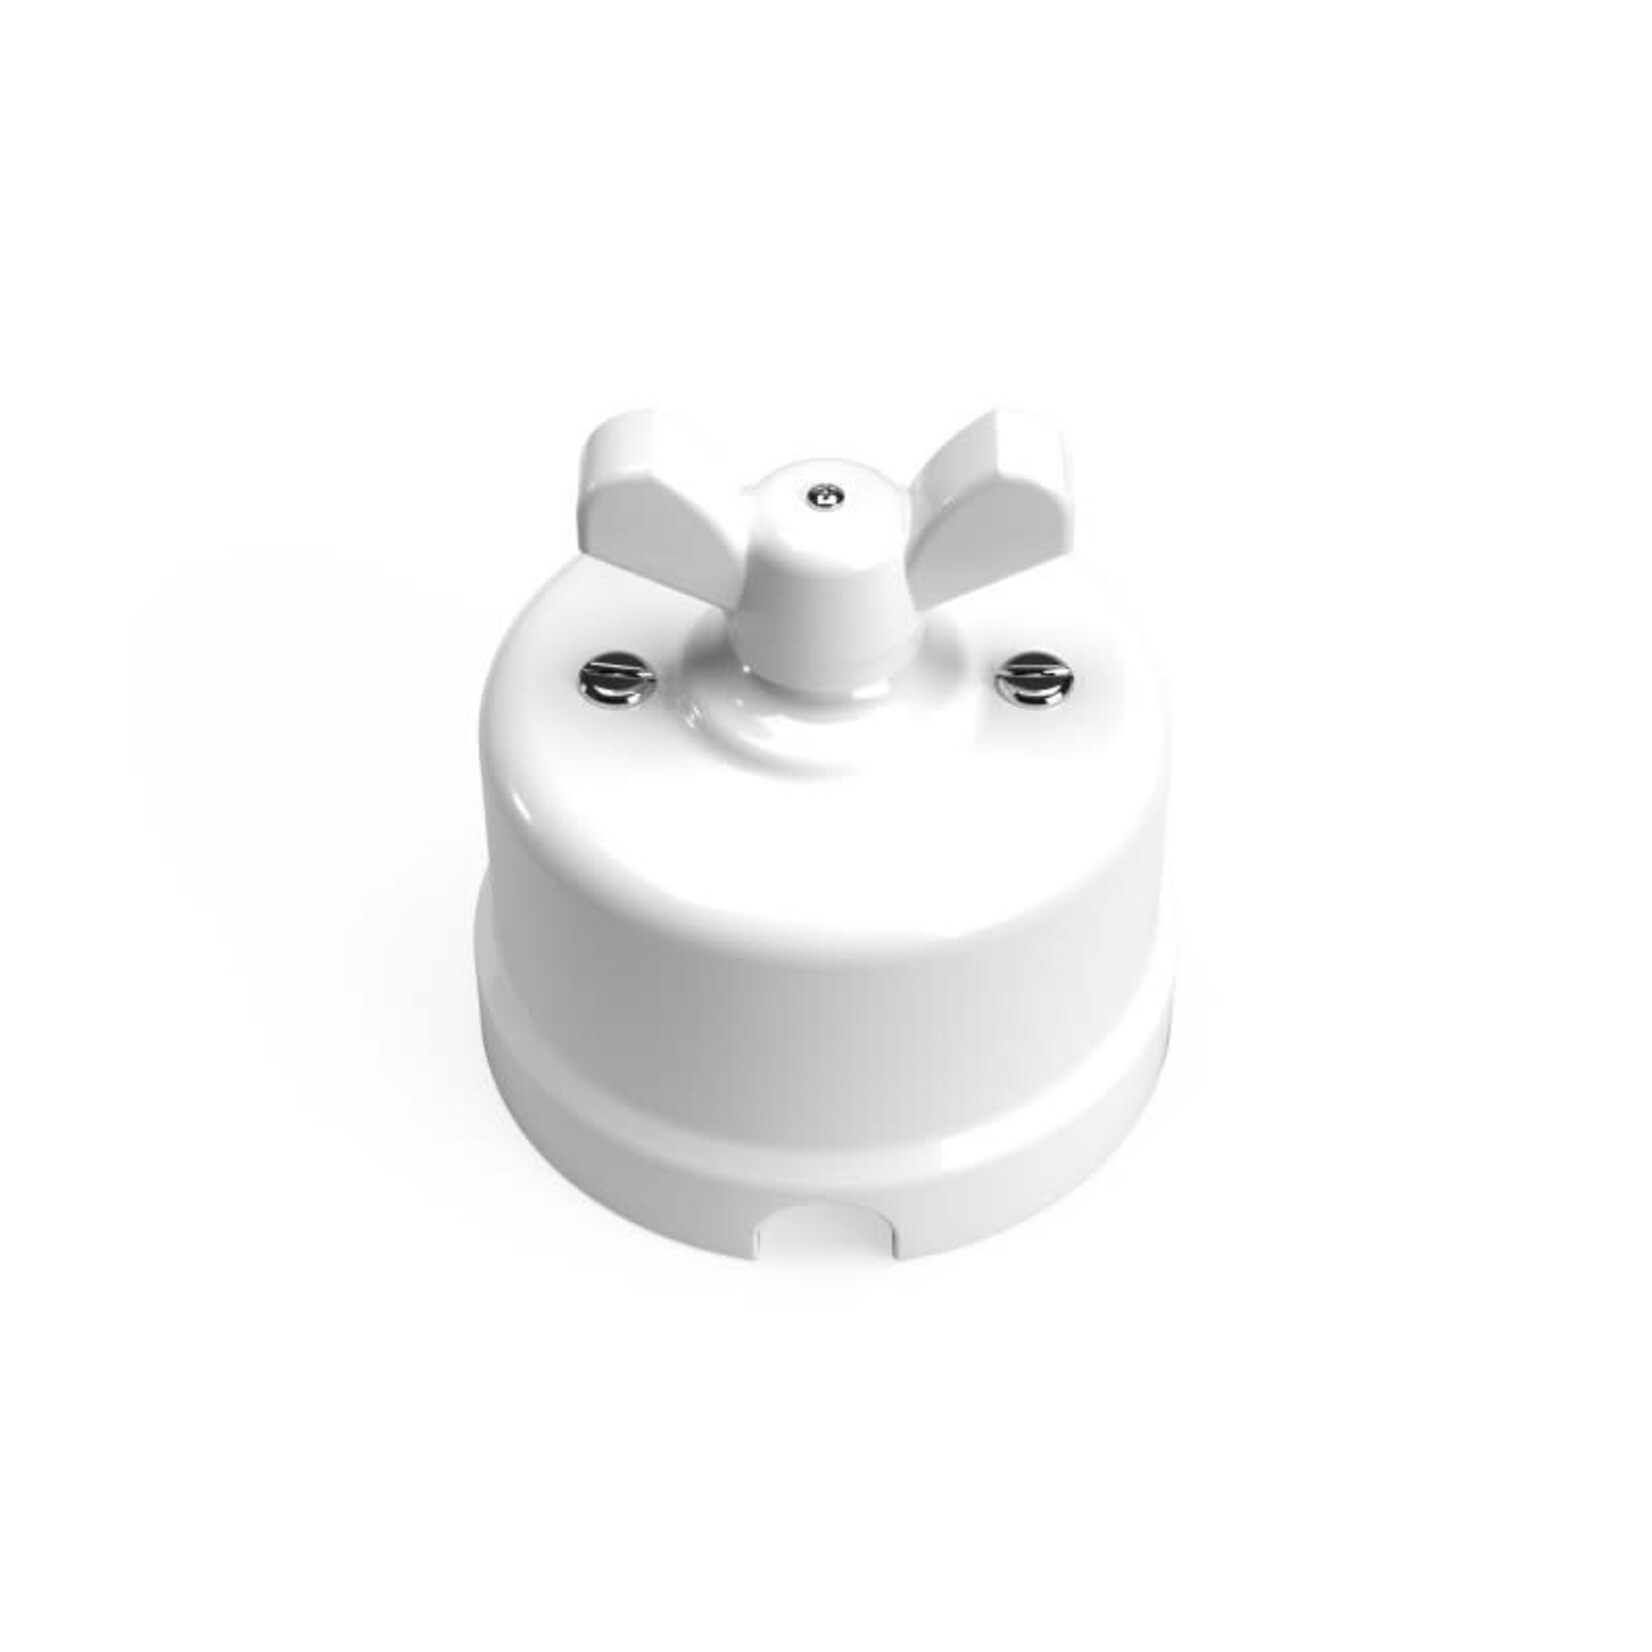 CCIT Switch/Diverter in white porcelain with WHITE butterfly nut